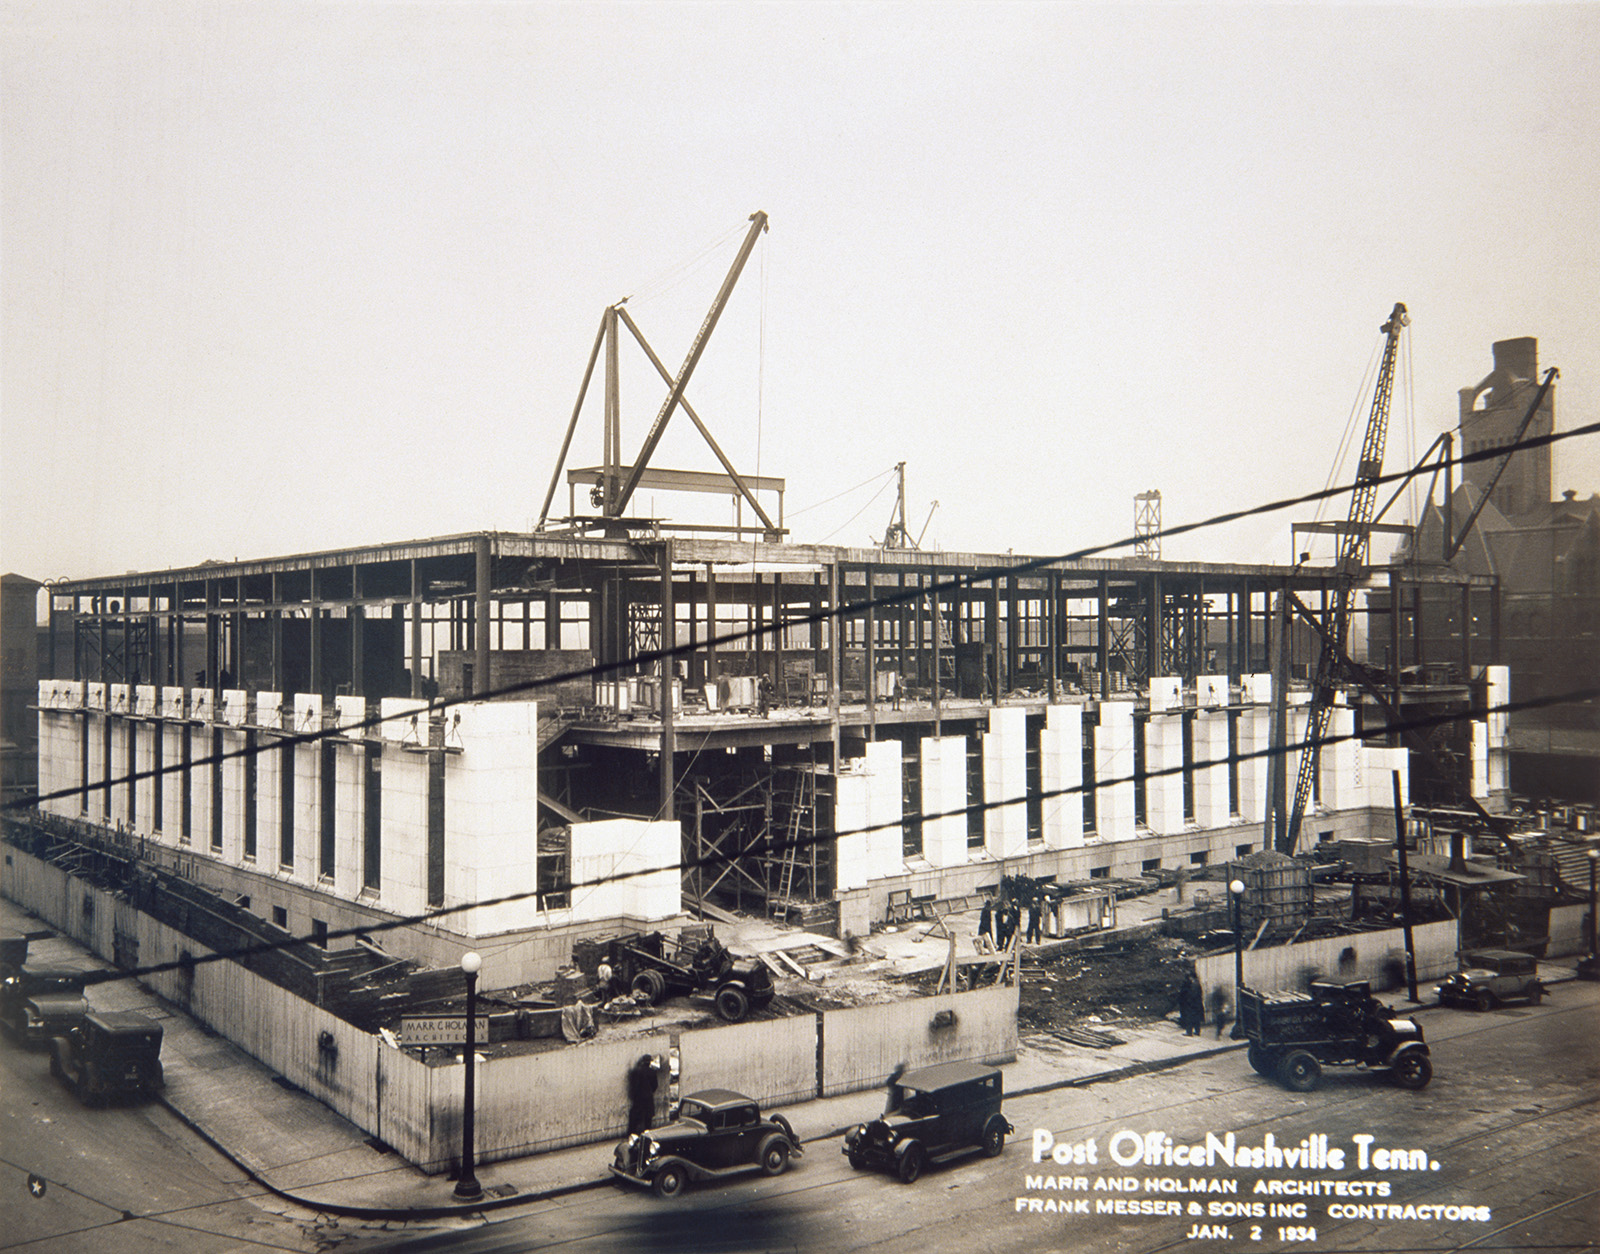 Girders rise and granite cladding appears as construction of the city’s main post office in 1934. Cranes surround the building as construction workers, trucks, and automobile travel around the site.